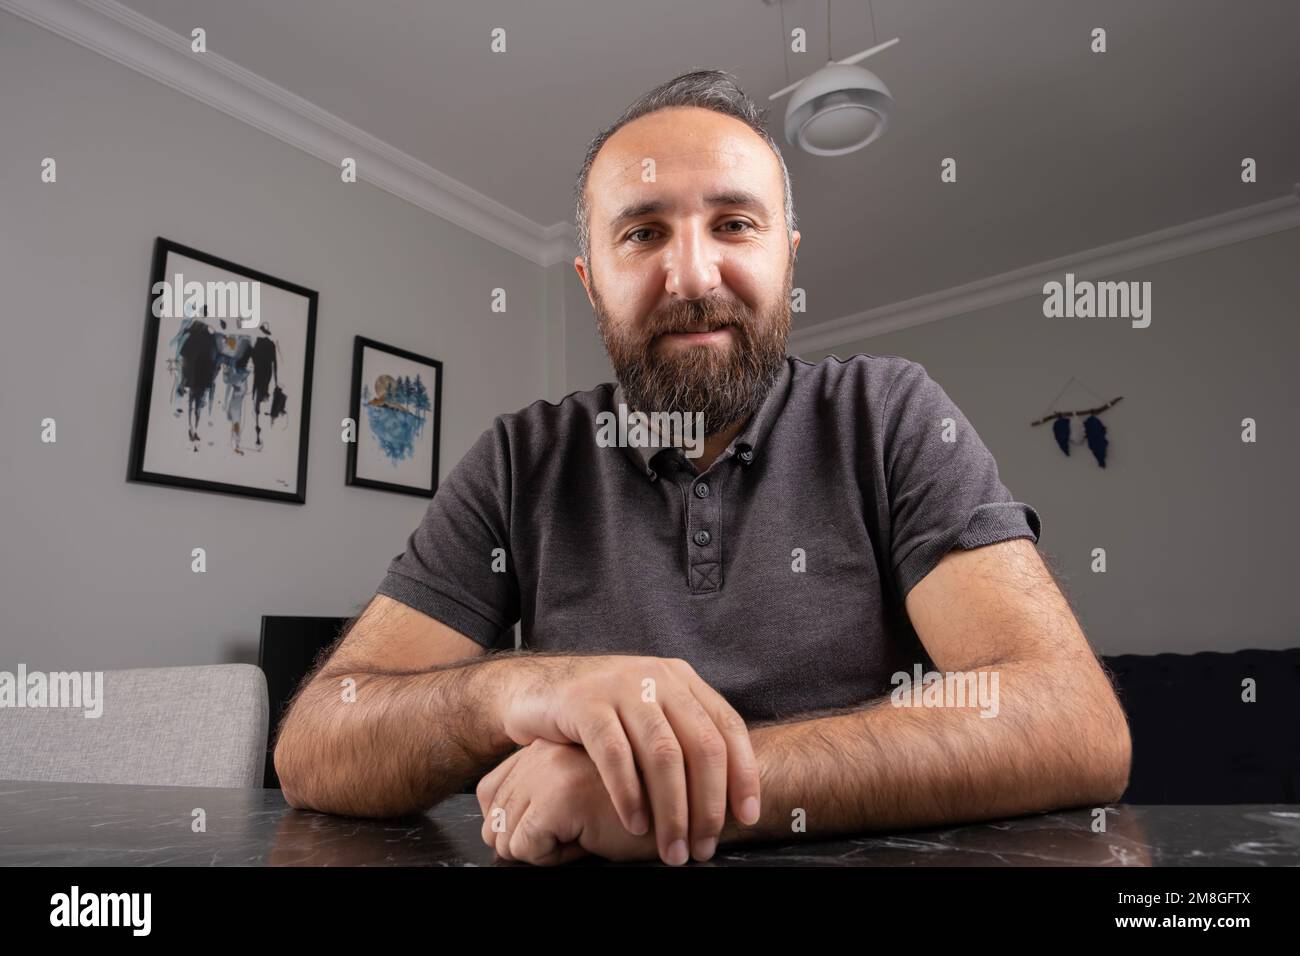 Portrait of smiling employee at home video call. Client or costumer online meeting concept. Web cam view looking camera. Freelance businessman. Stock Photo